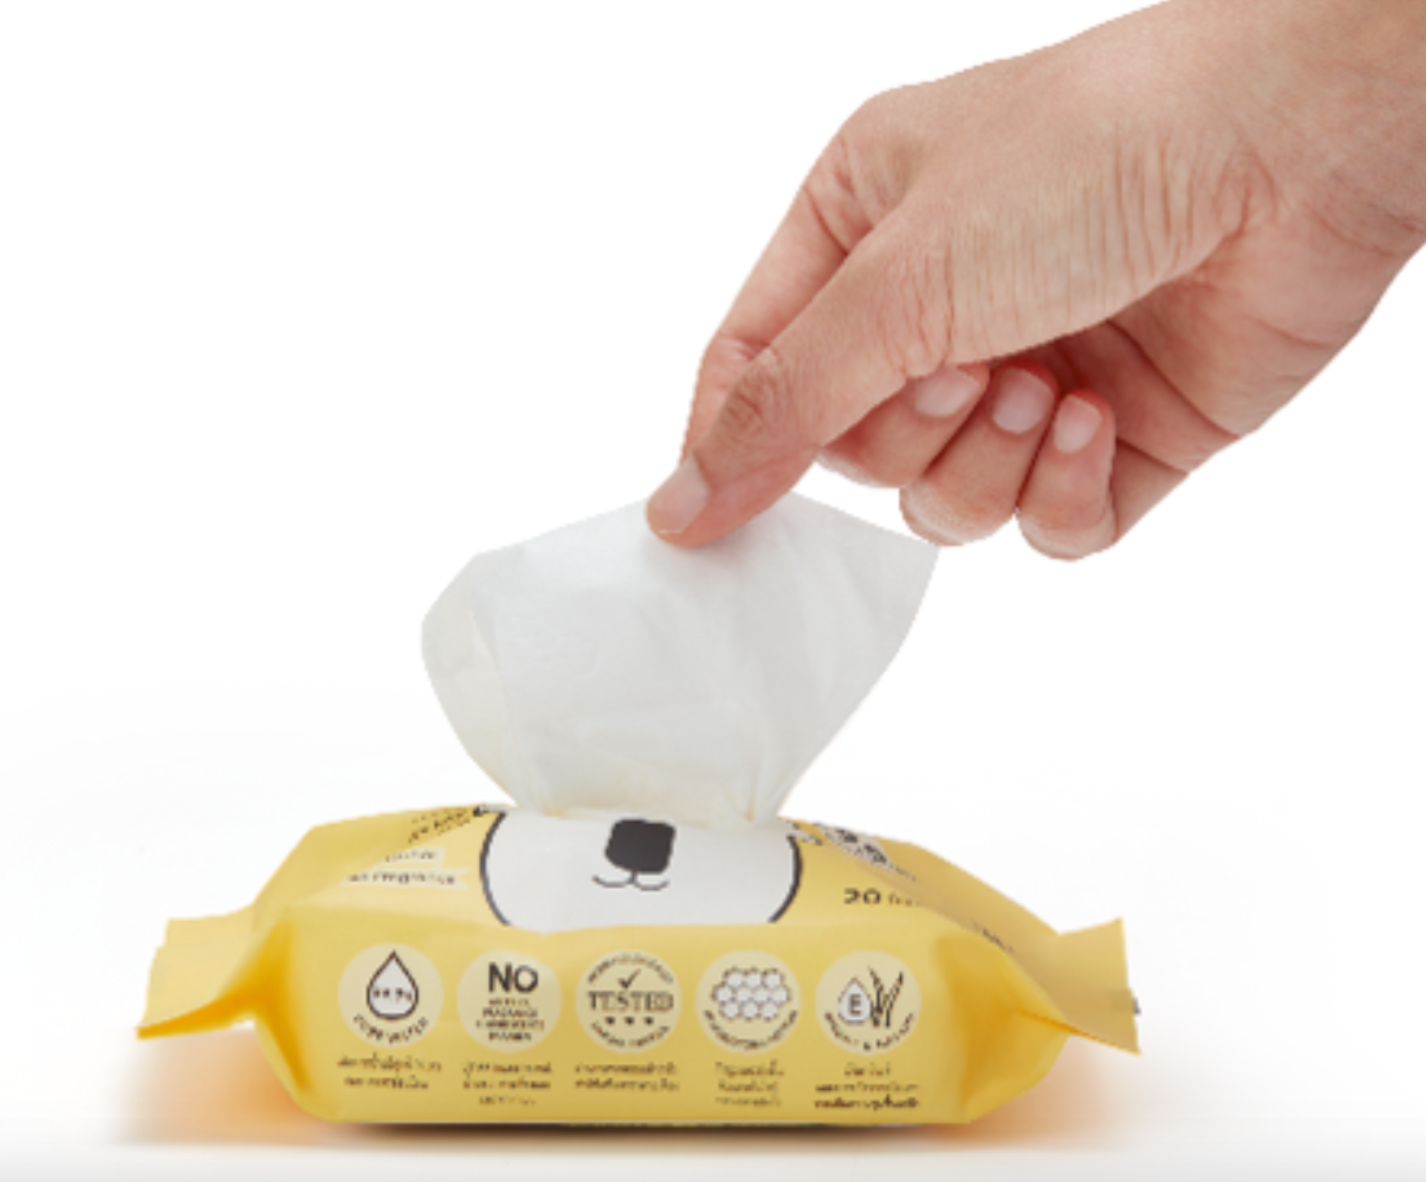 Baby Moby Water Wipes (20 Sheets)